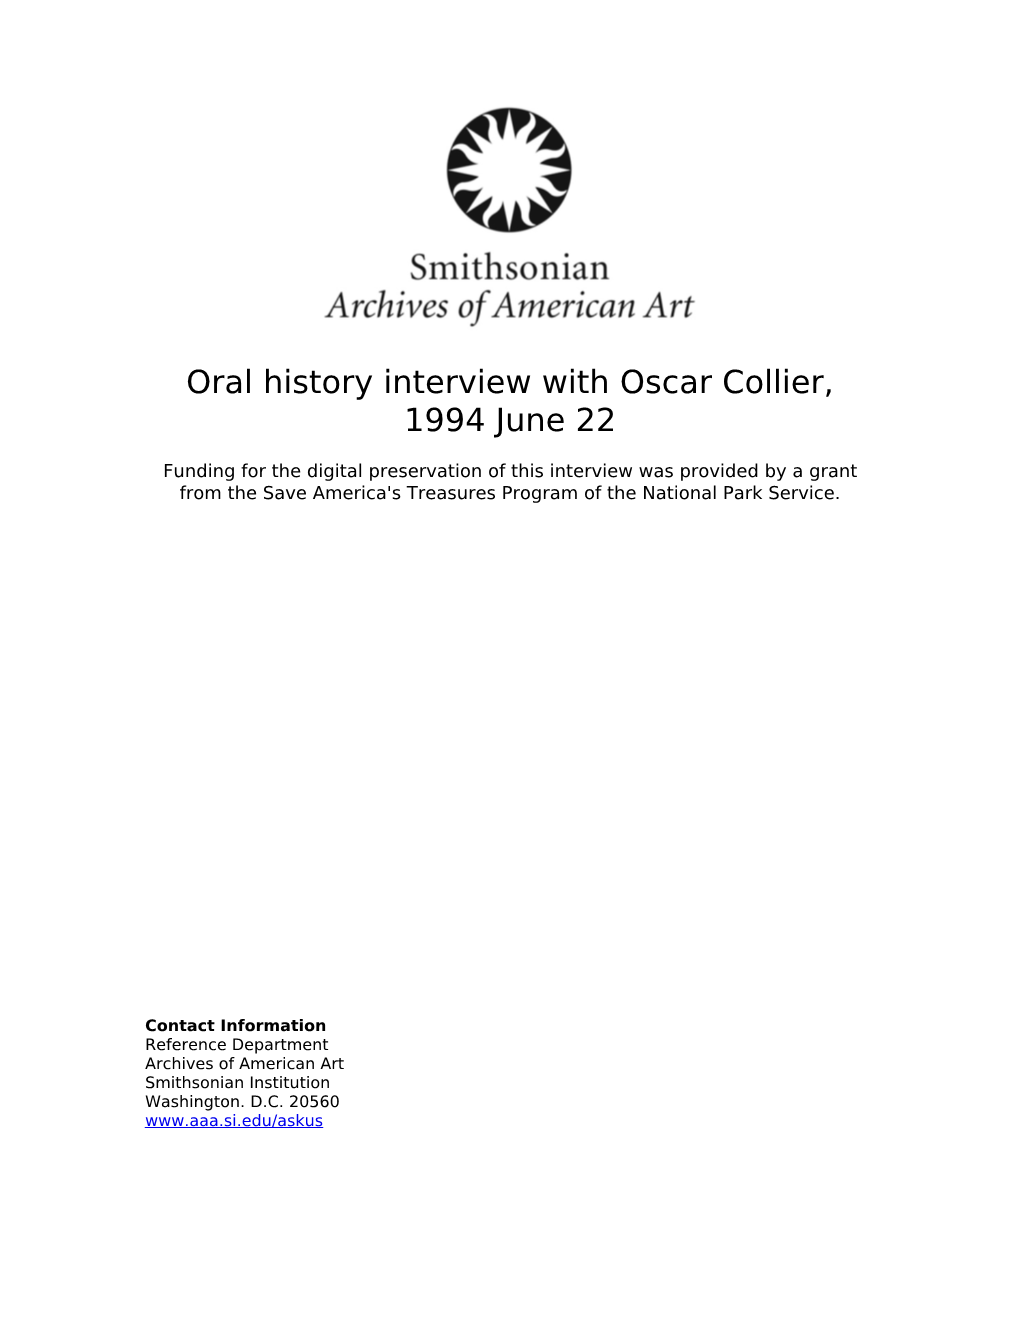 Oral History Interview with Oscar Collier, 1994 June 22